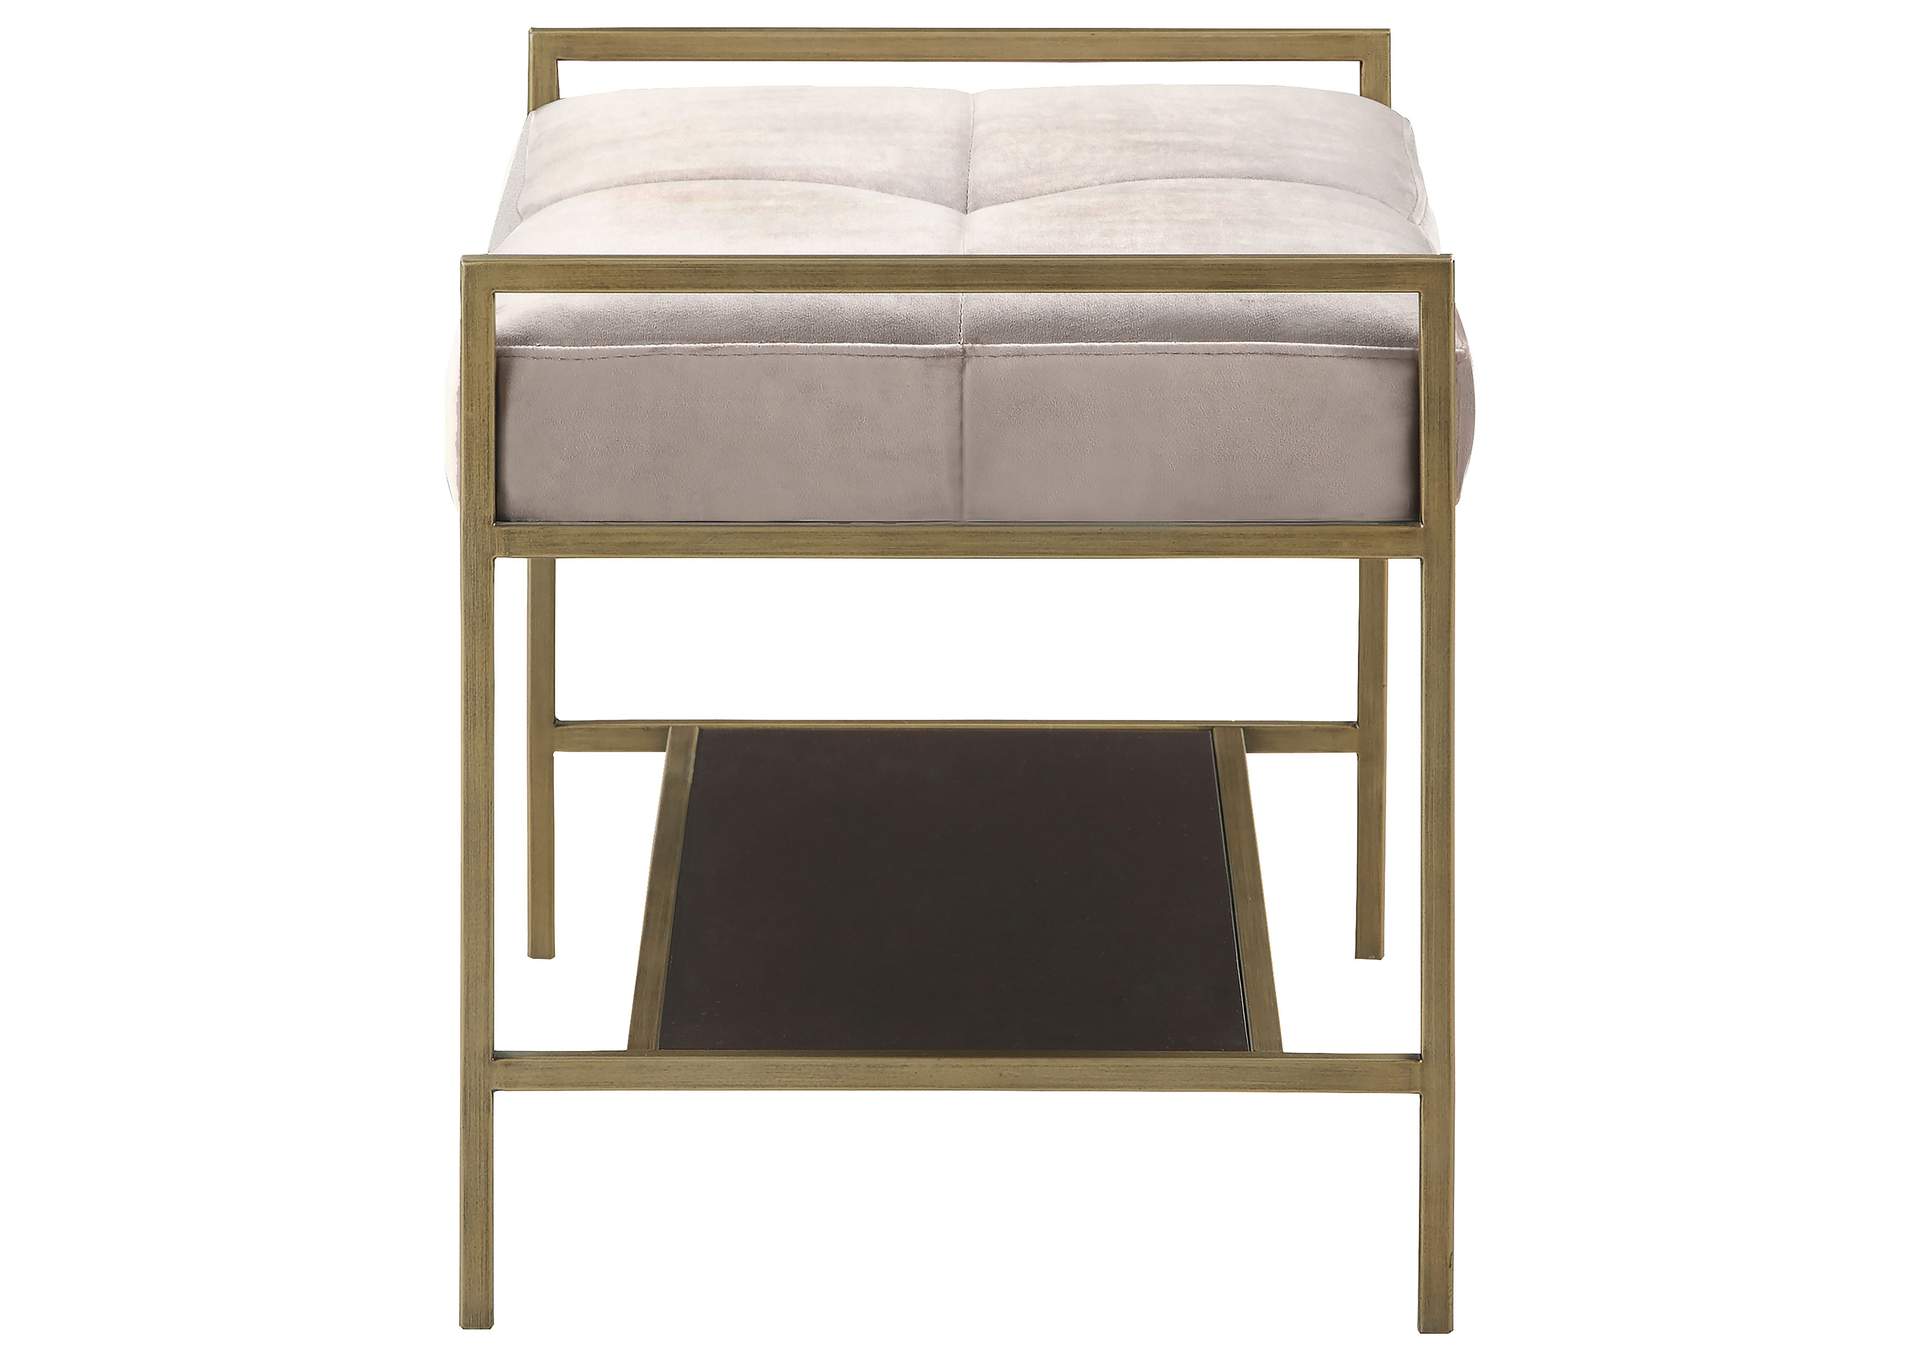 Maria Upholstered Stool Warm Grey and Gold,Coaster Furniture